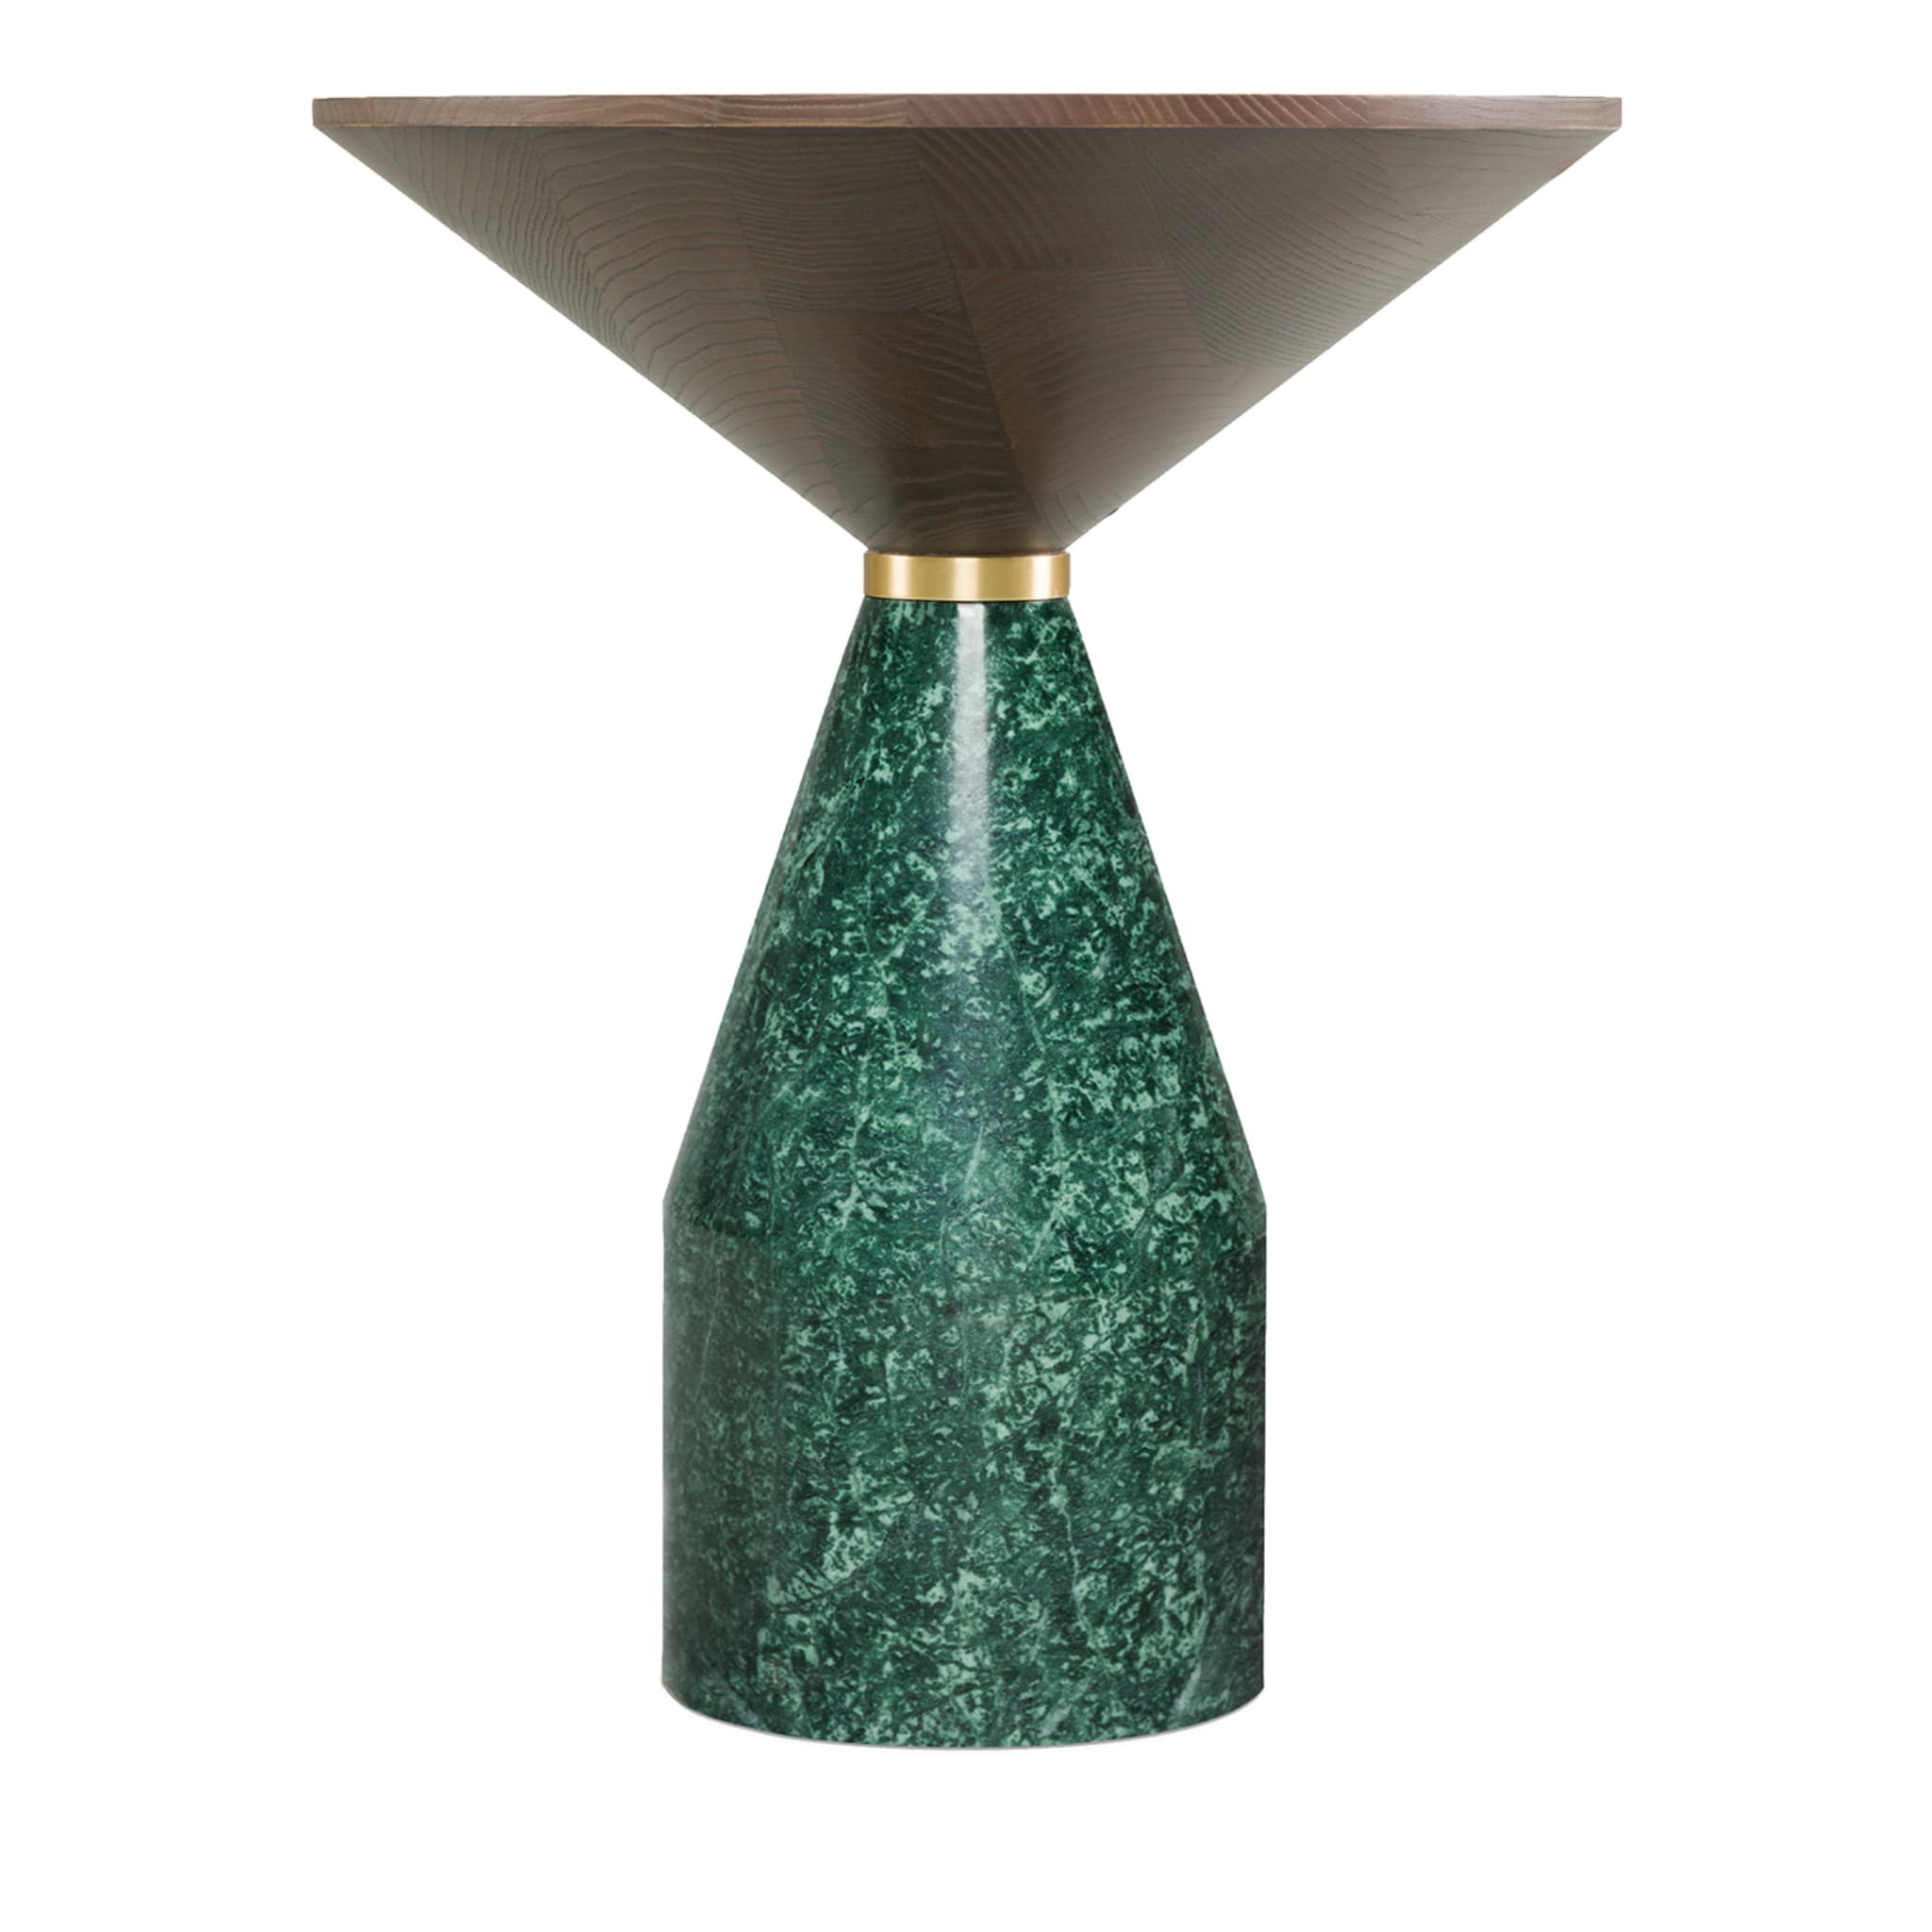 Cino Small Green Marble Table - Main view